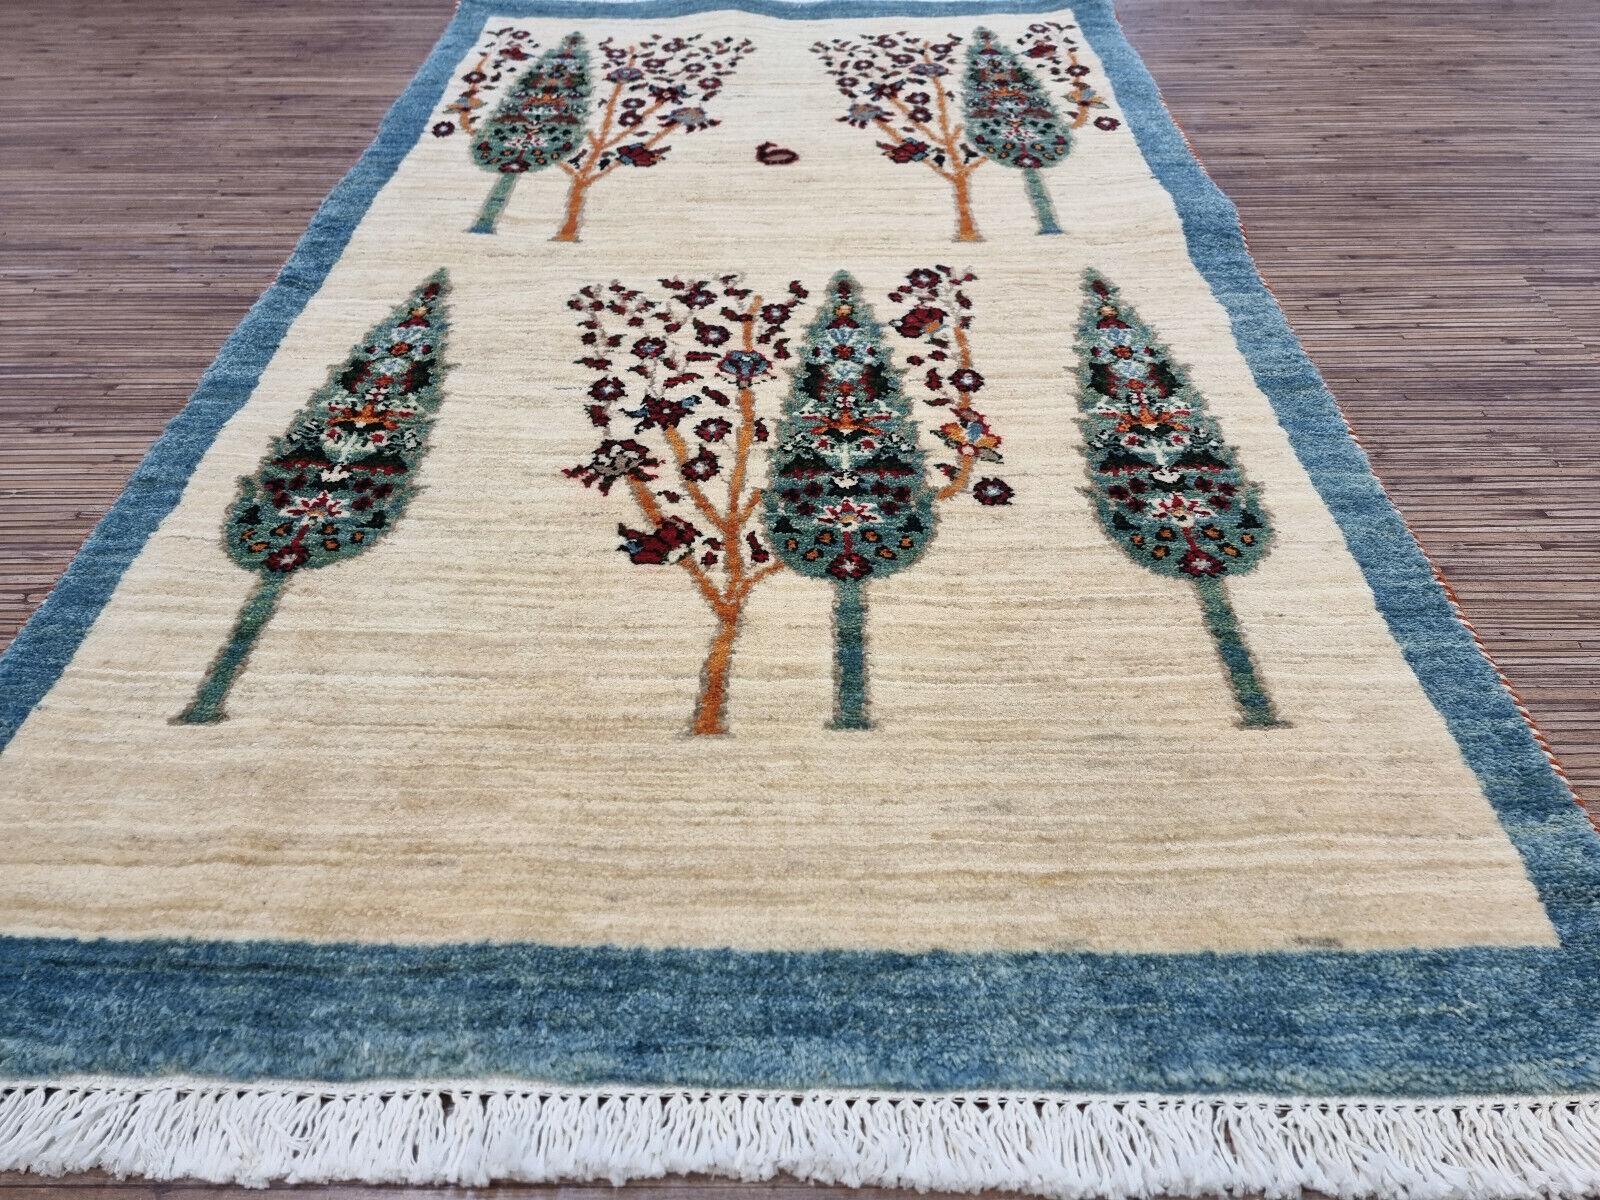 Late 20th Century Handmade Vintage Persian Style Gabbeh Rug 2.4' x 4', 1980s - 1D117 For Sale